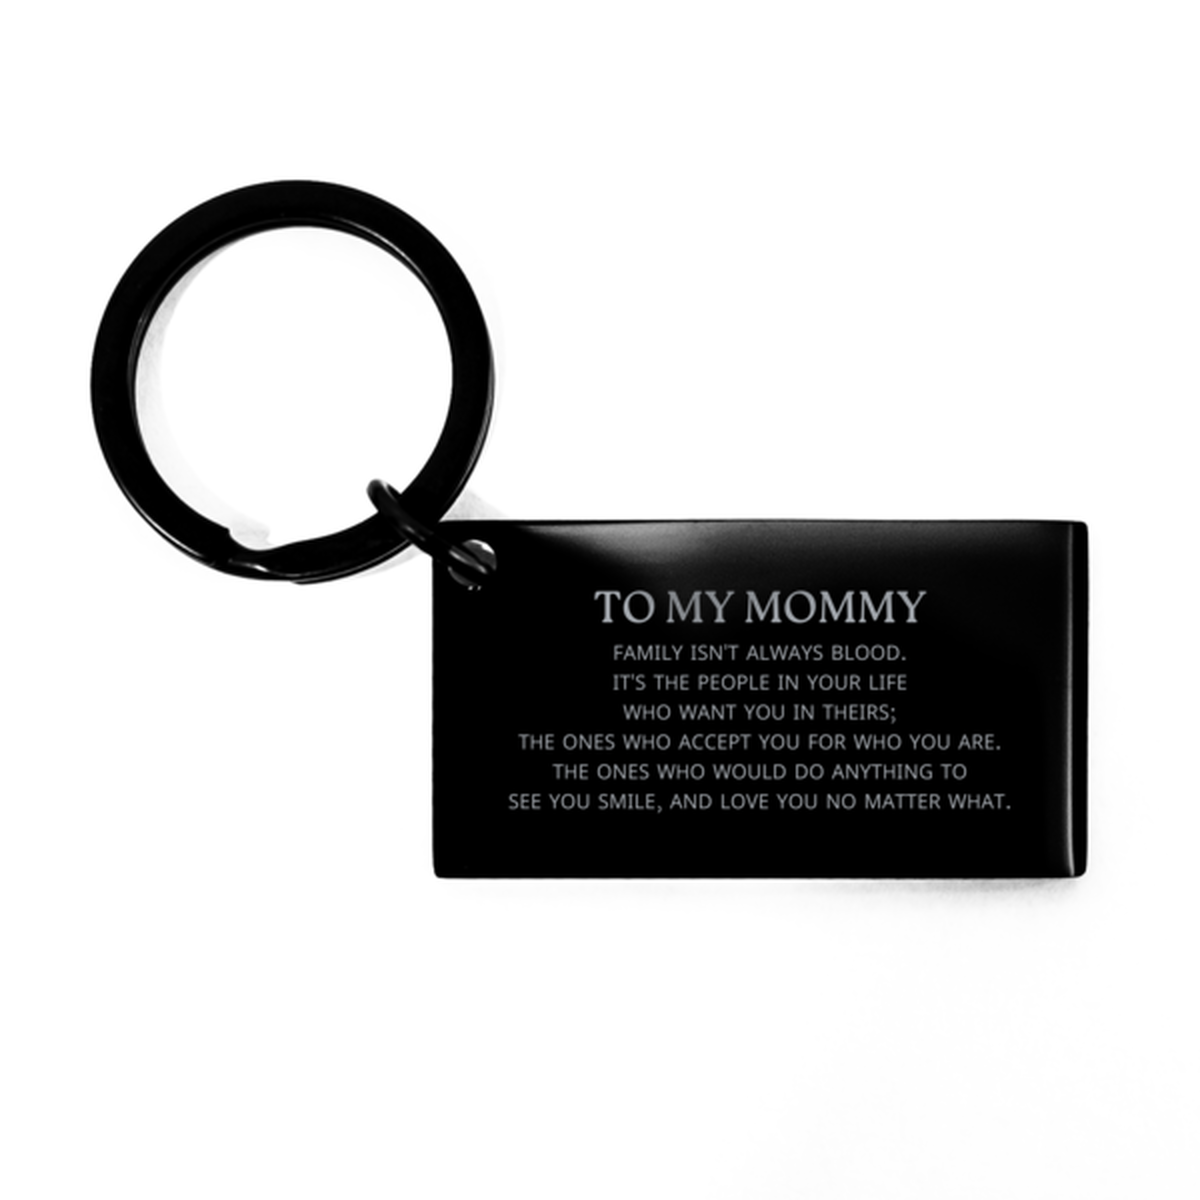 To My Mommy Gifts, Family isn't always blood, Mommy Keychain, Birthday Christmas Unique Present For Mommy